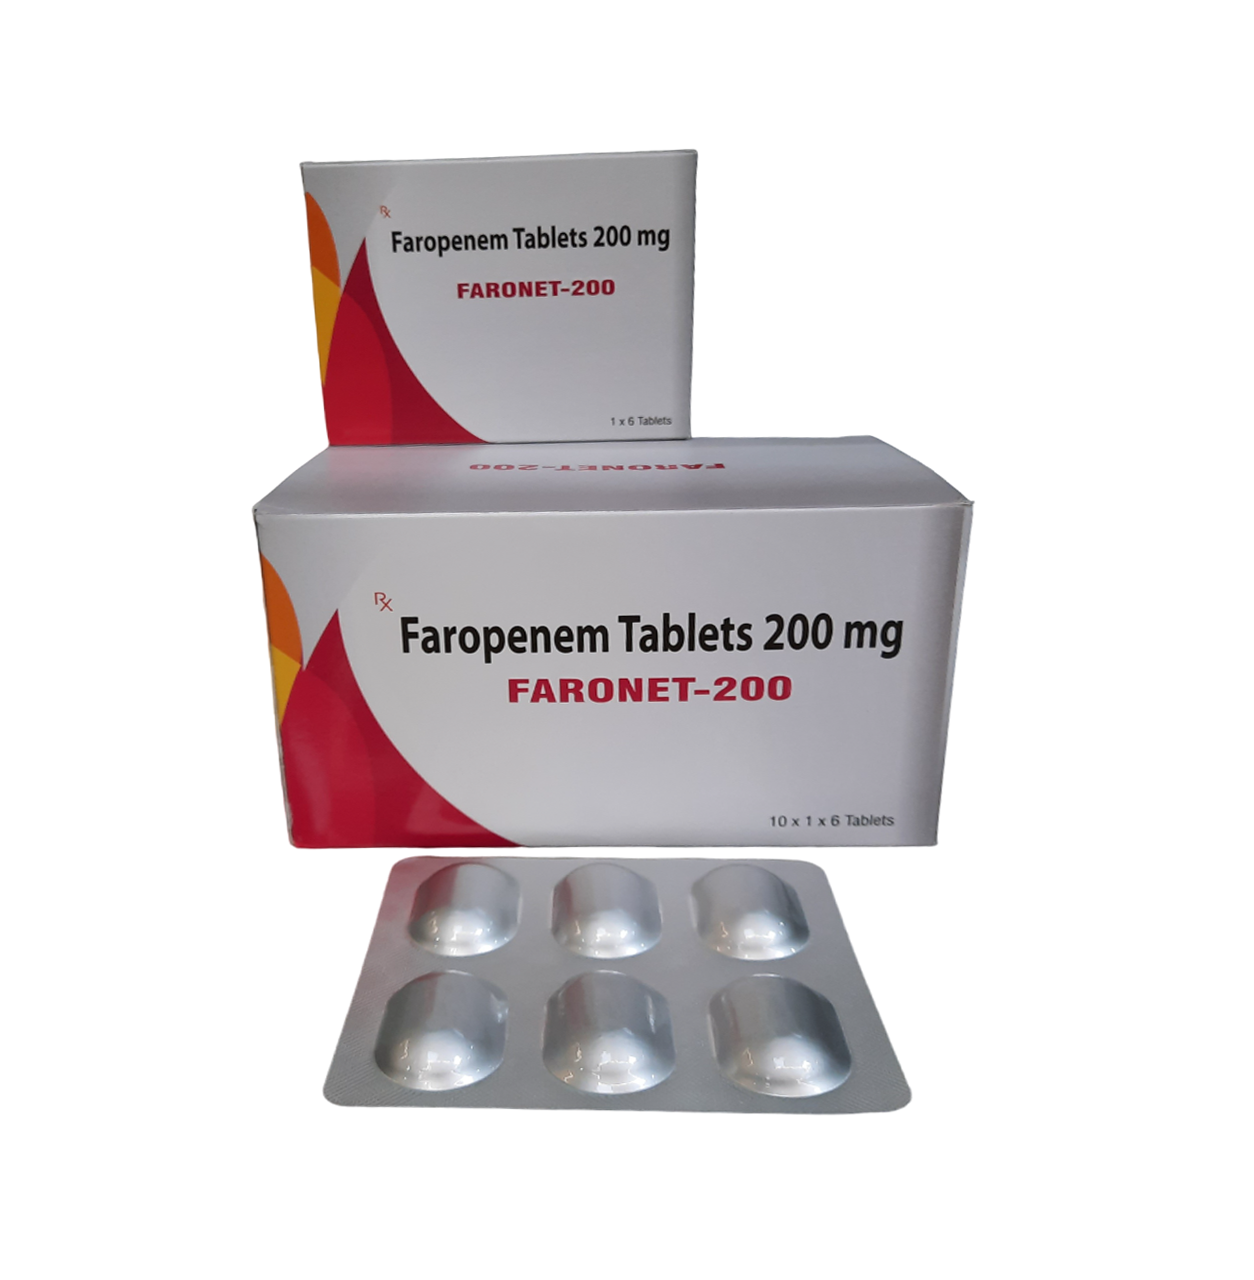 Product Name: FARONET 200, Compositions of FARONET 200 are Faropenem Tablets 200 mg - Human Biolife India Pvt. Ltd